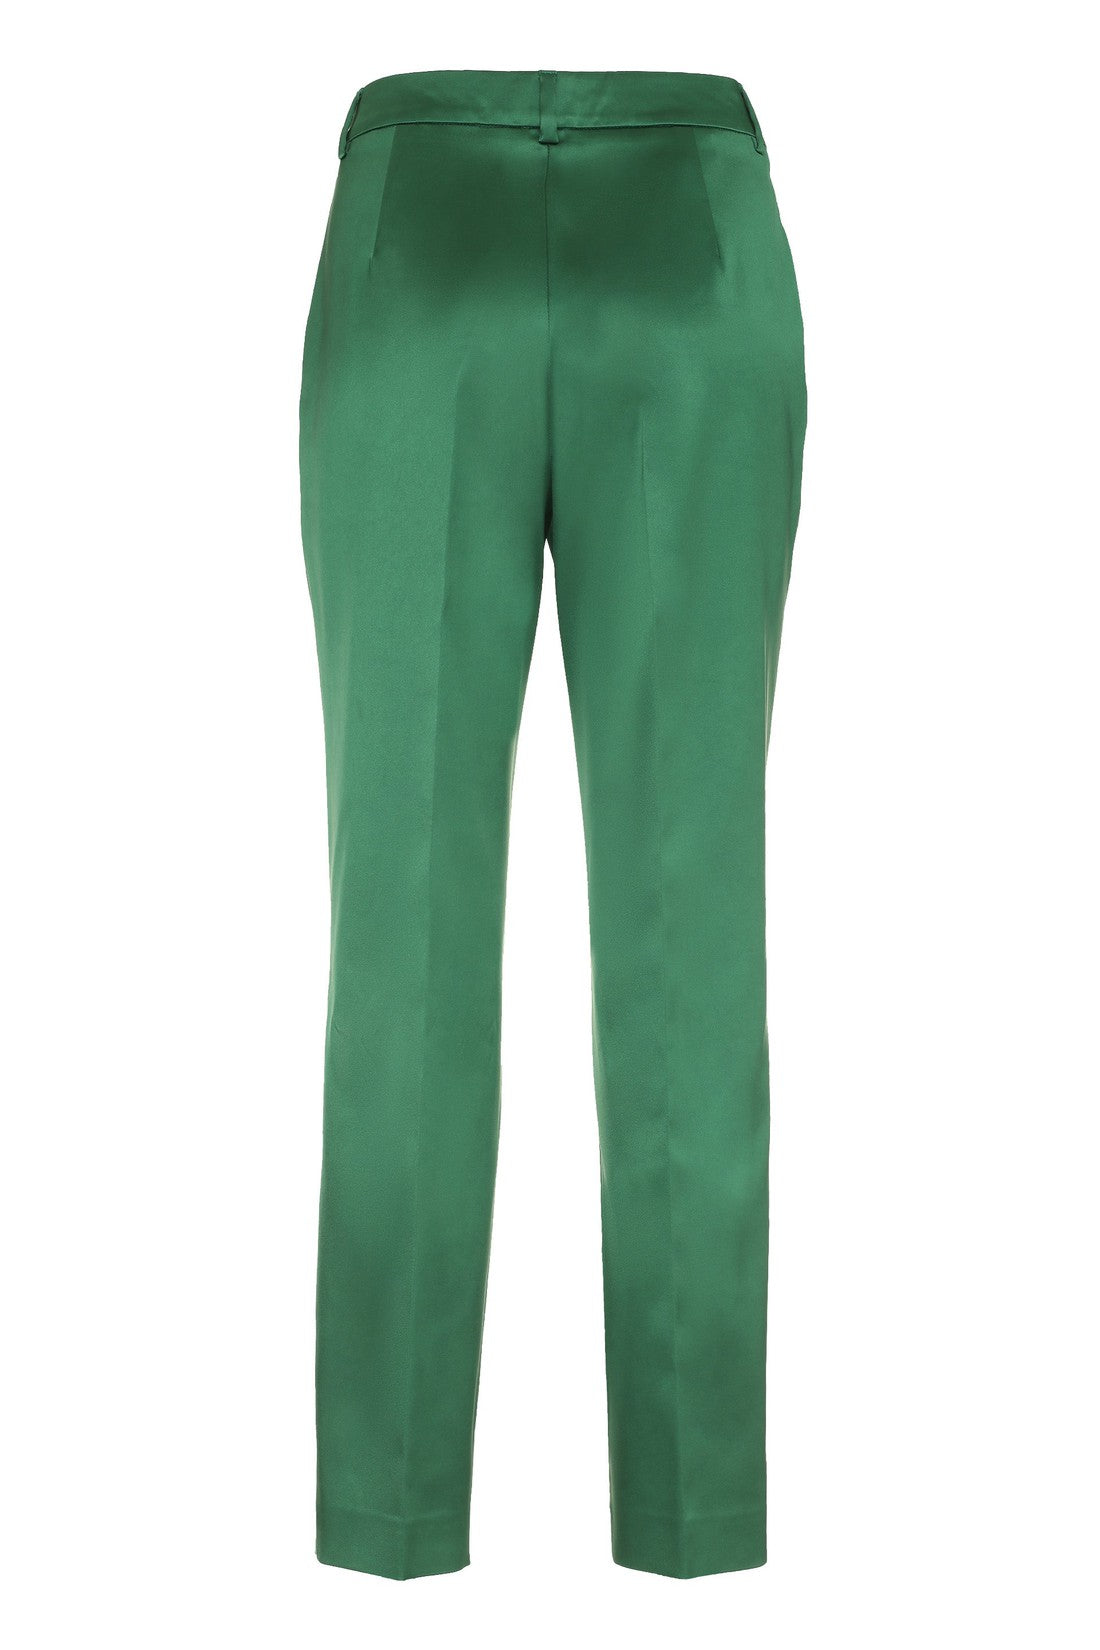 Boutique Moschino-OUTLET-SALE-Satin trousers-ARCHIVIST